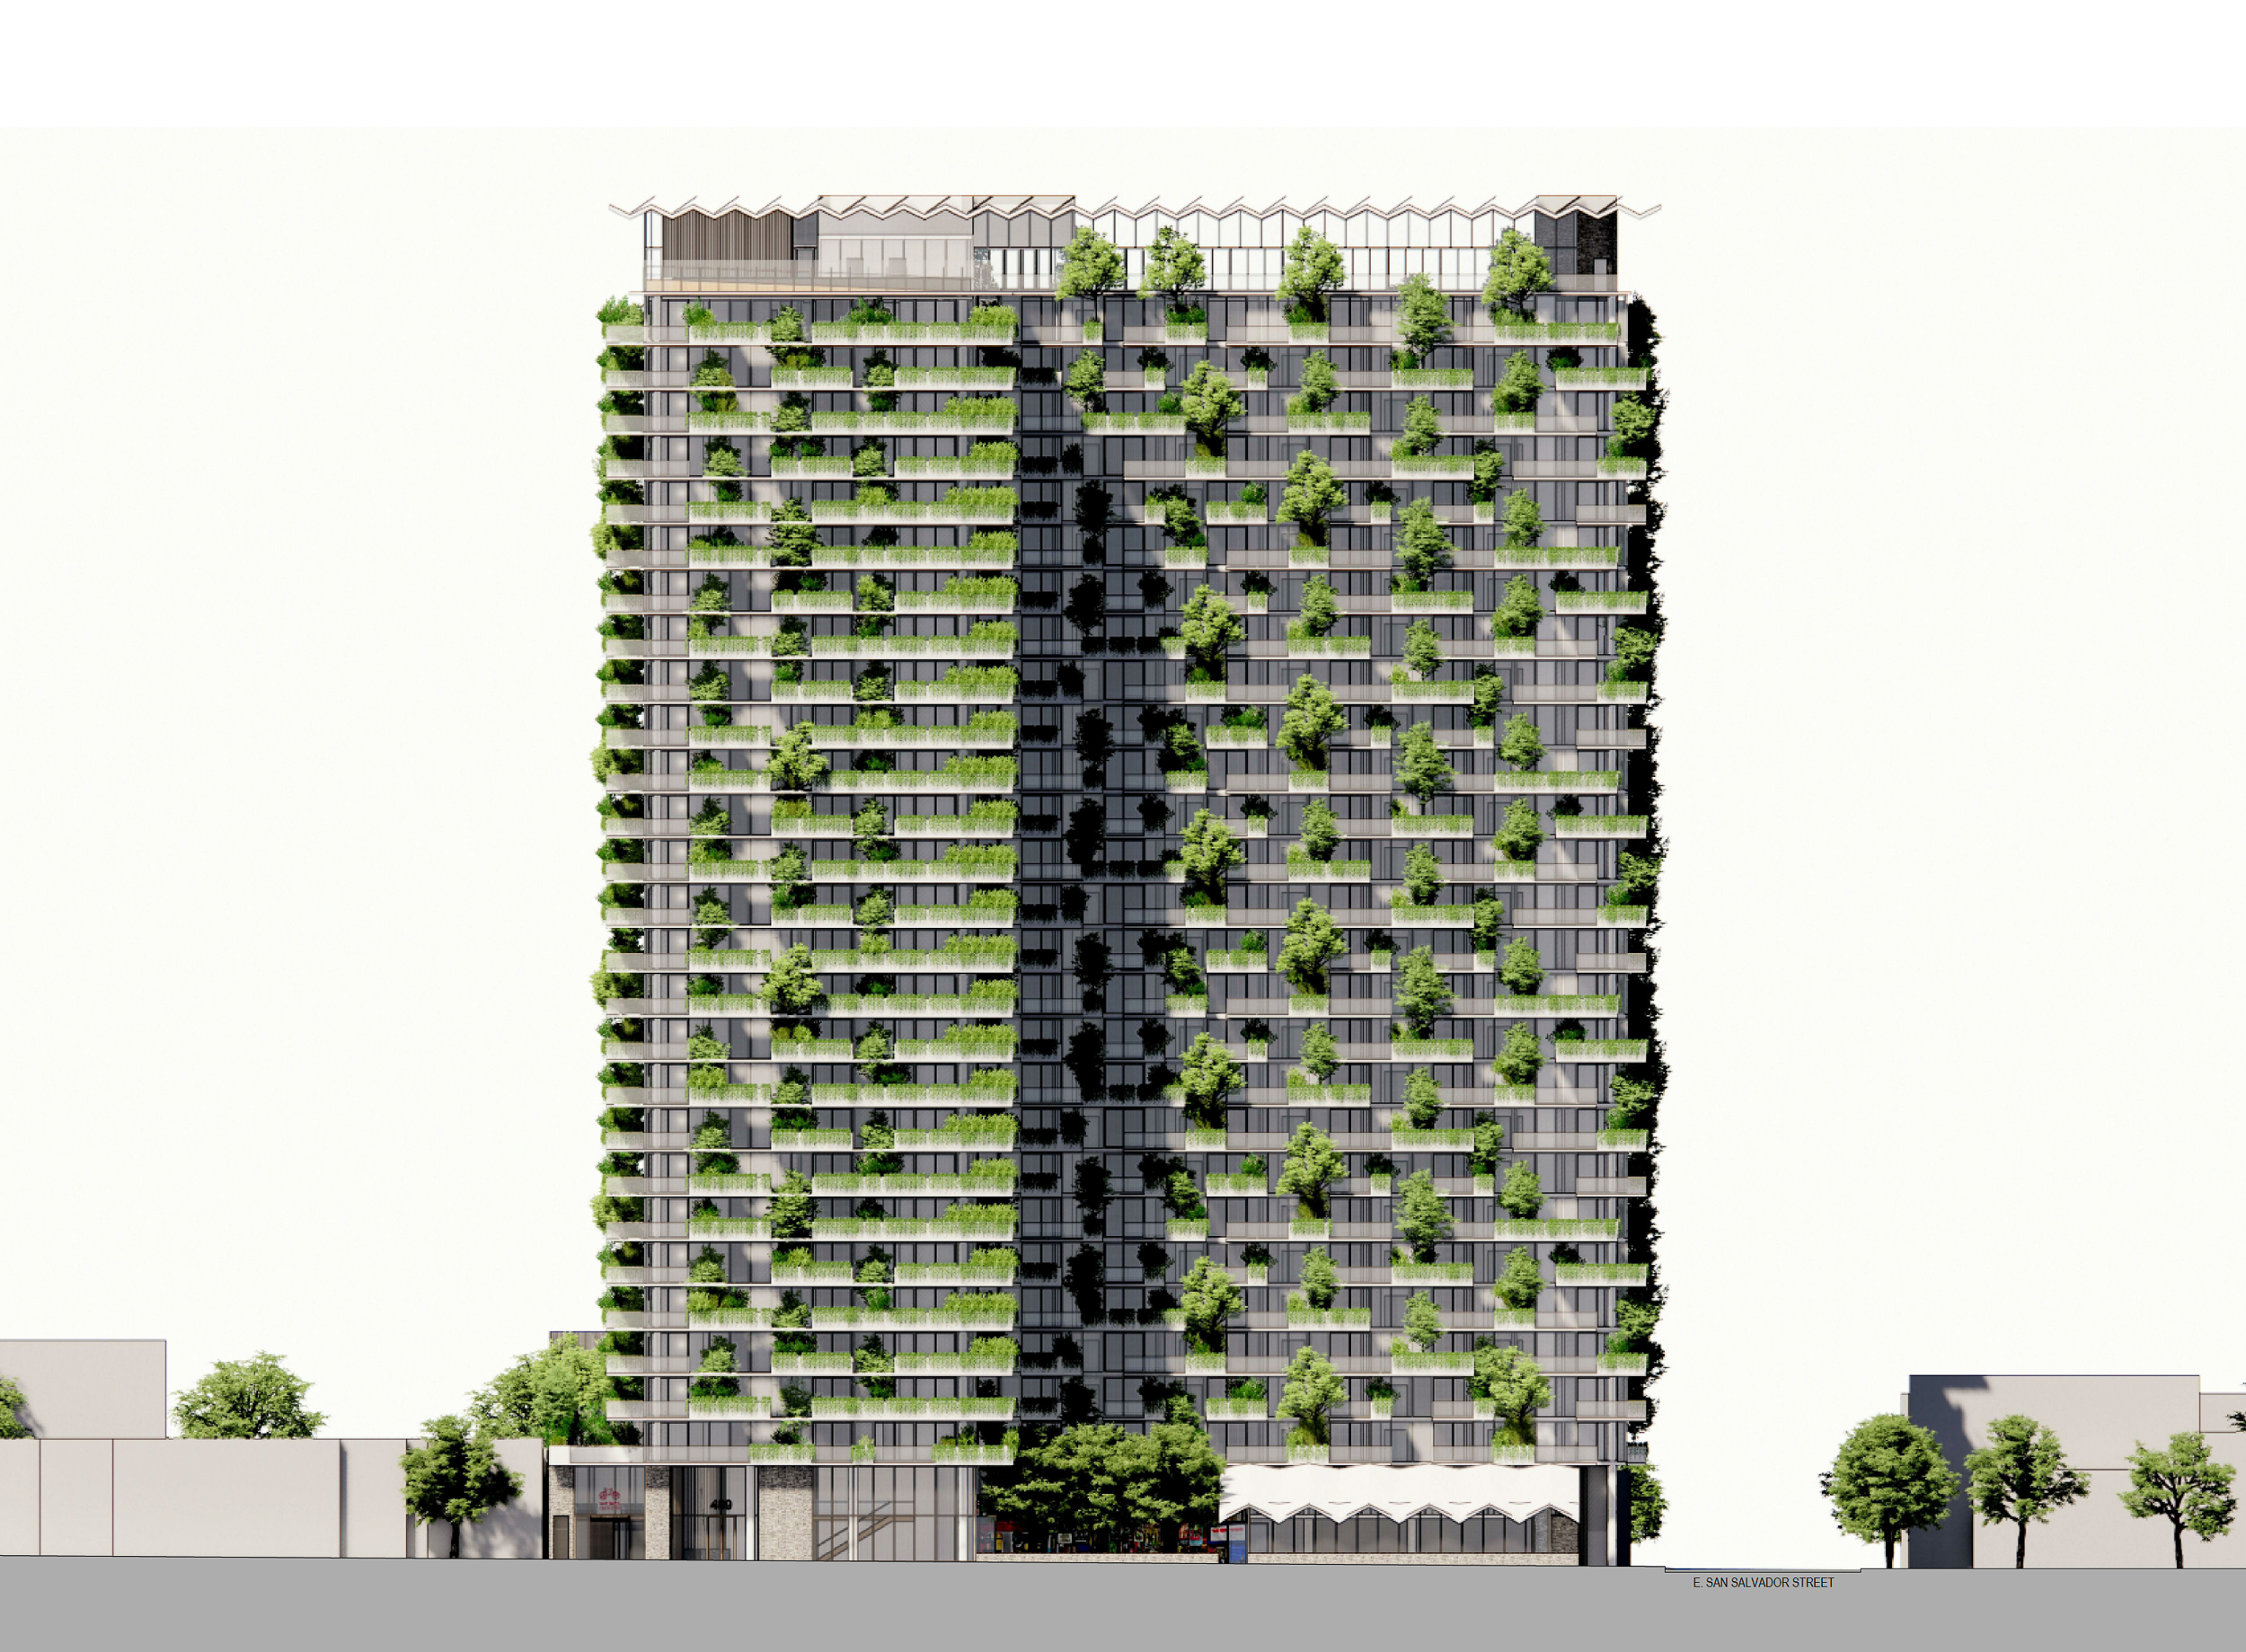 409 South Second Street facade elevation, design by James KM Cheng Architects